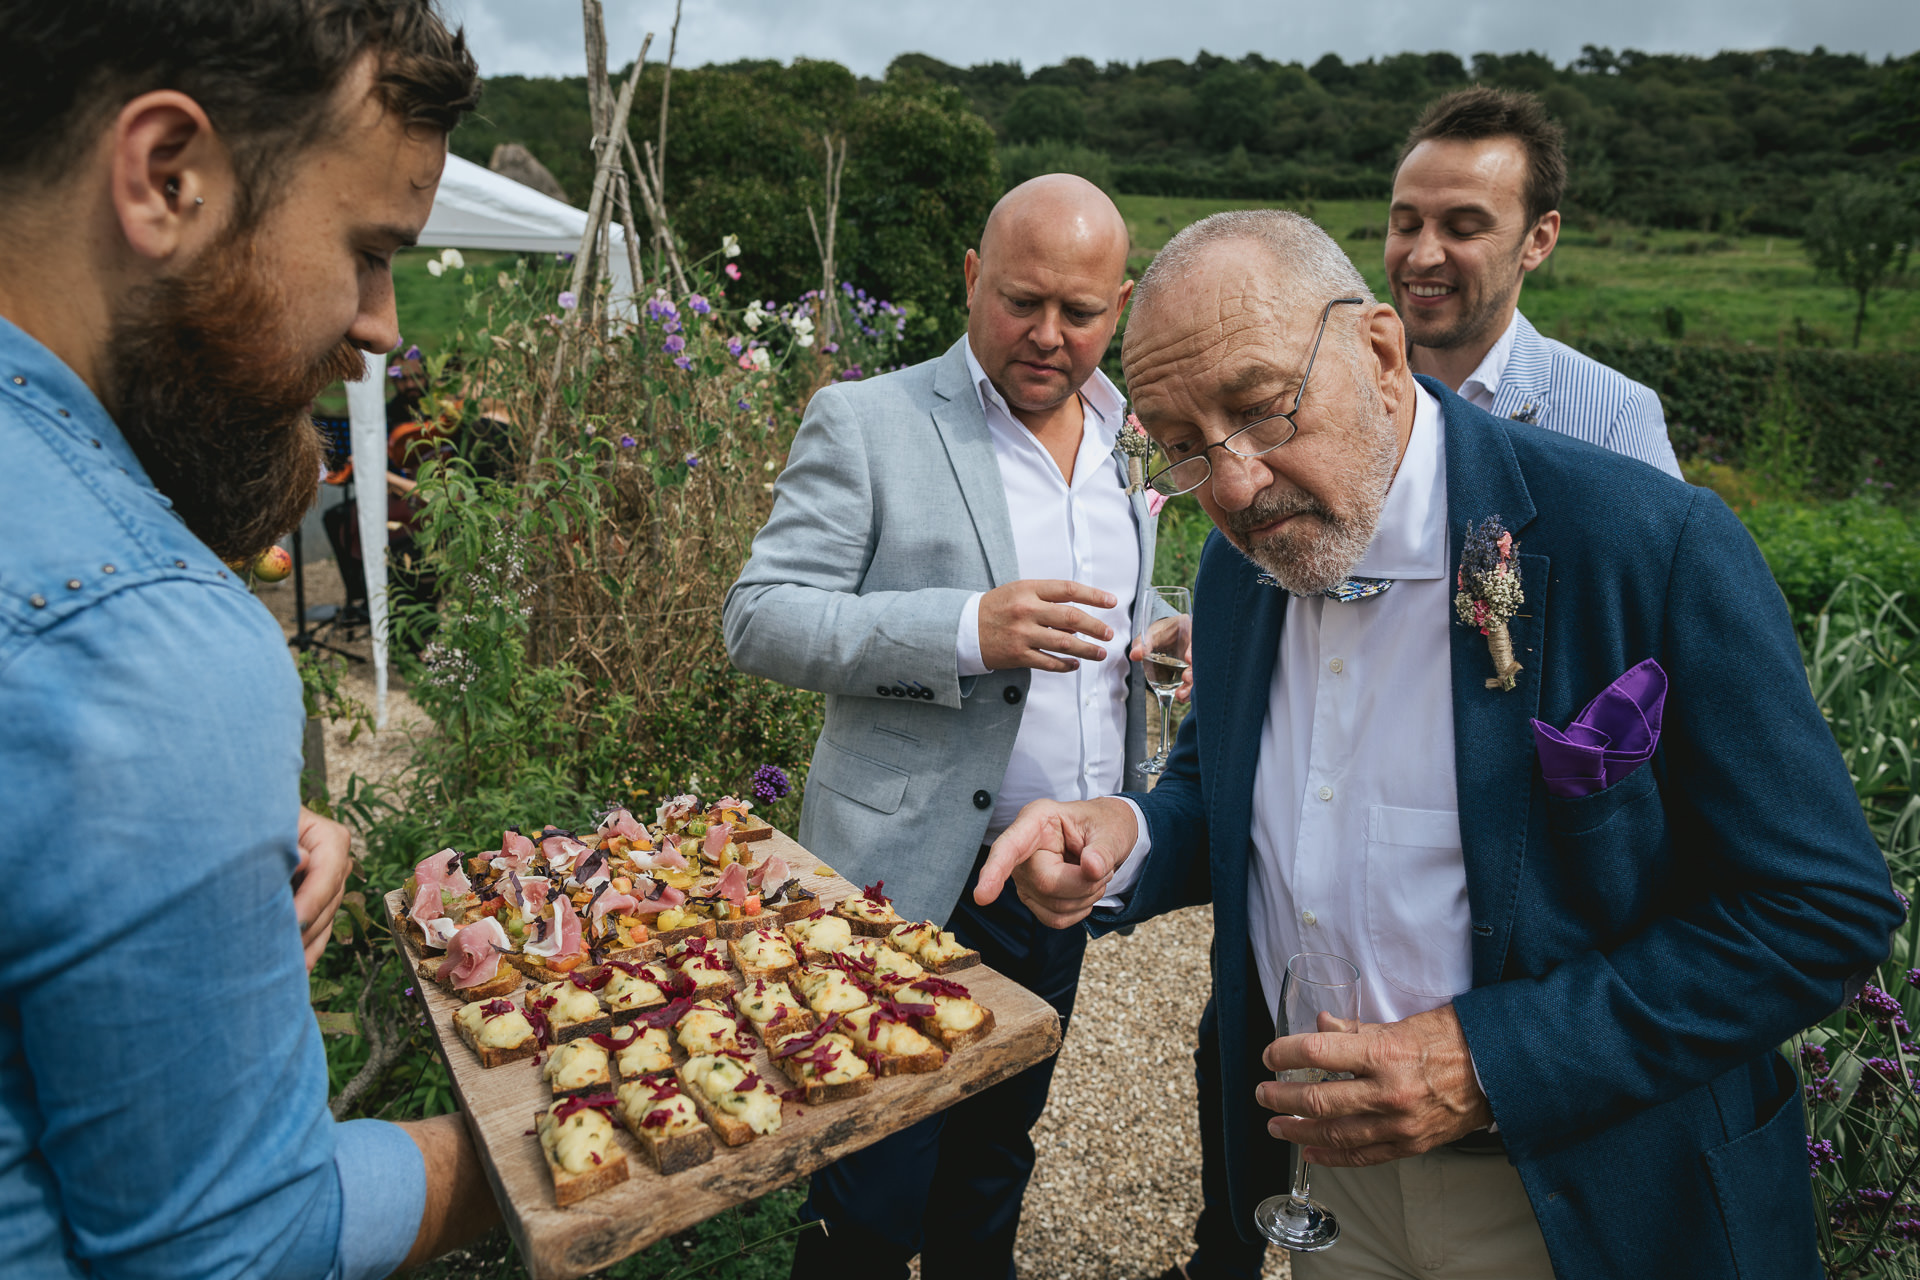 Father of the bride looking at wedding canapés